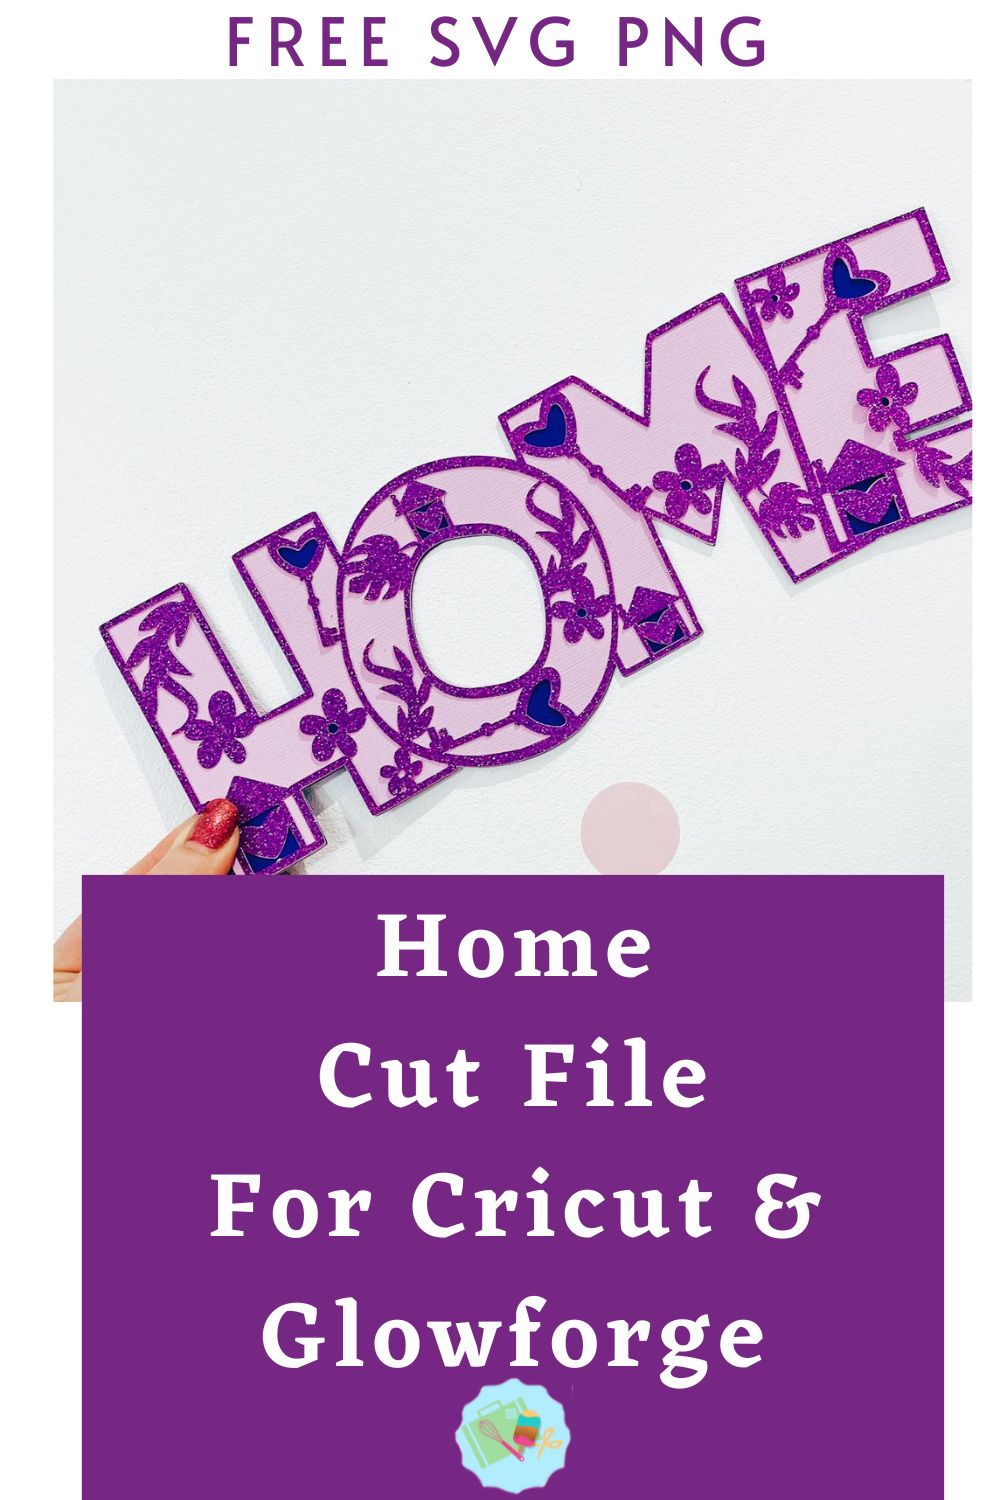 Free Home SVG, PNG for Cricut, Glowforge and Silhouette